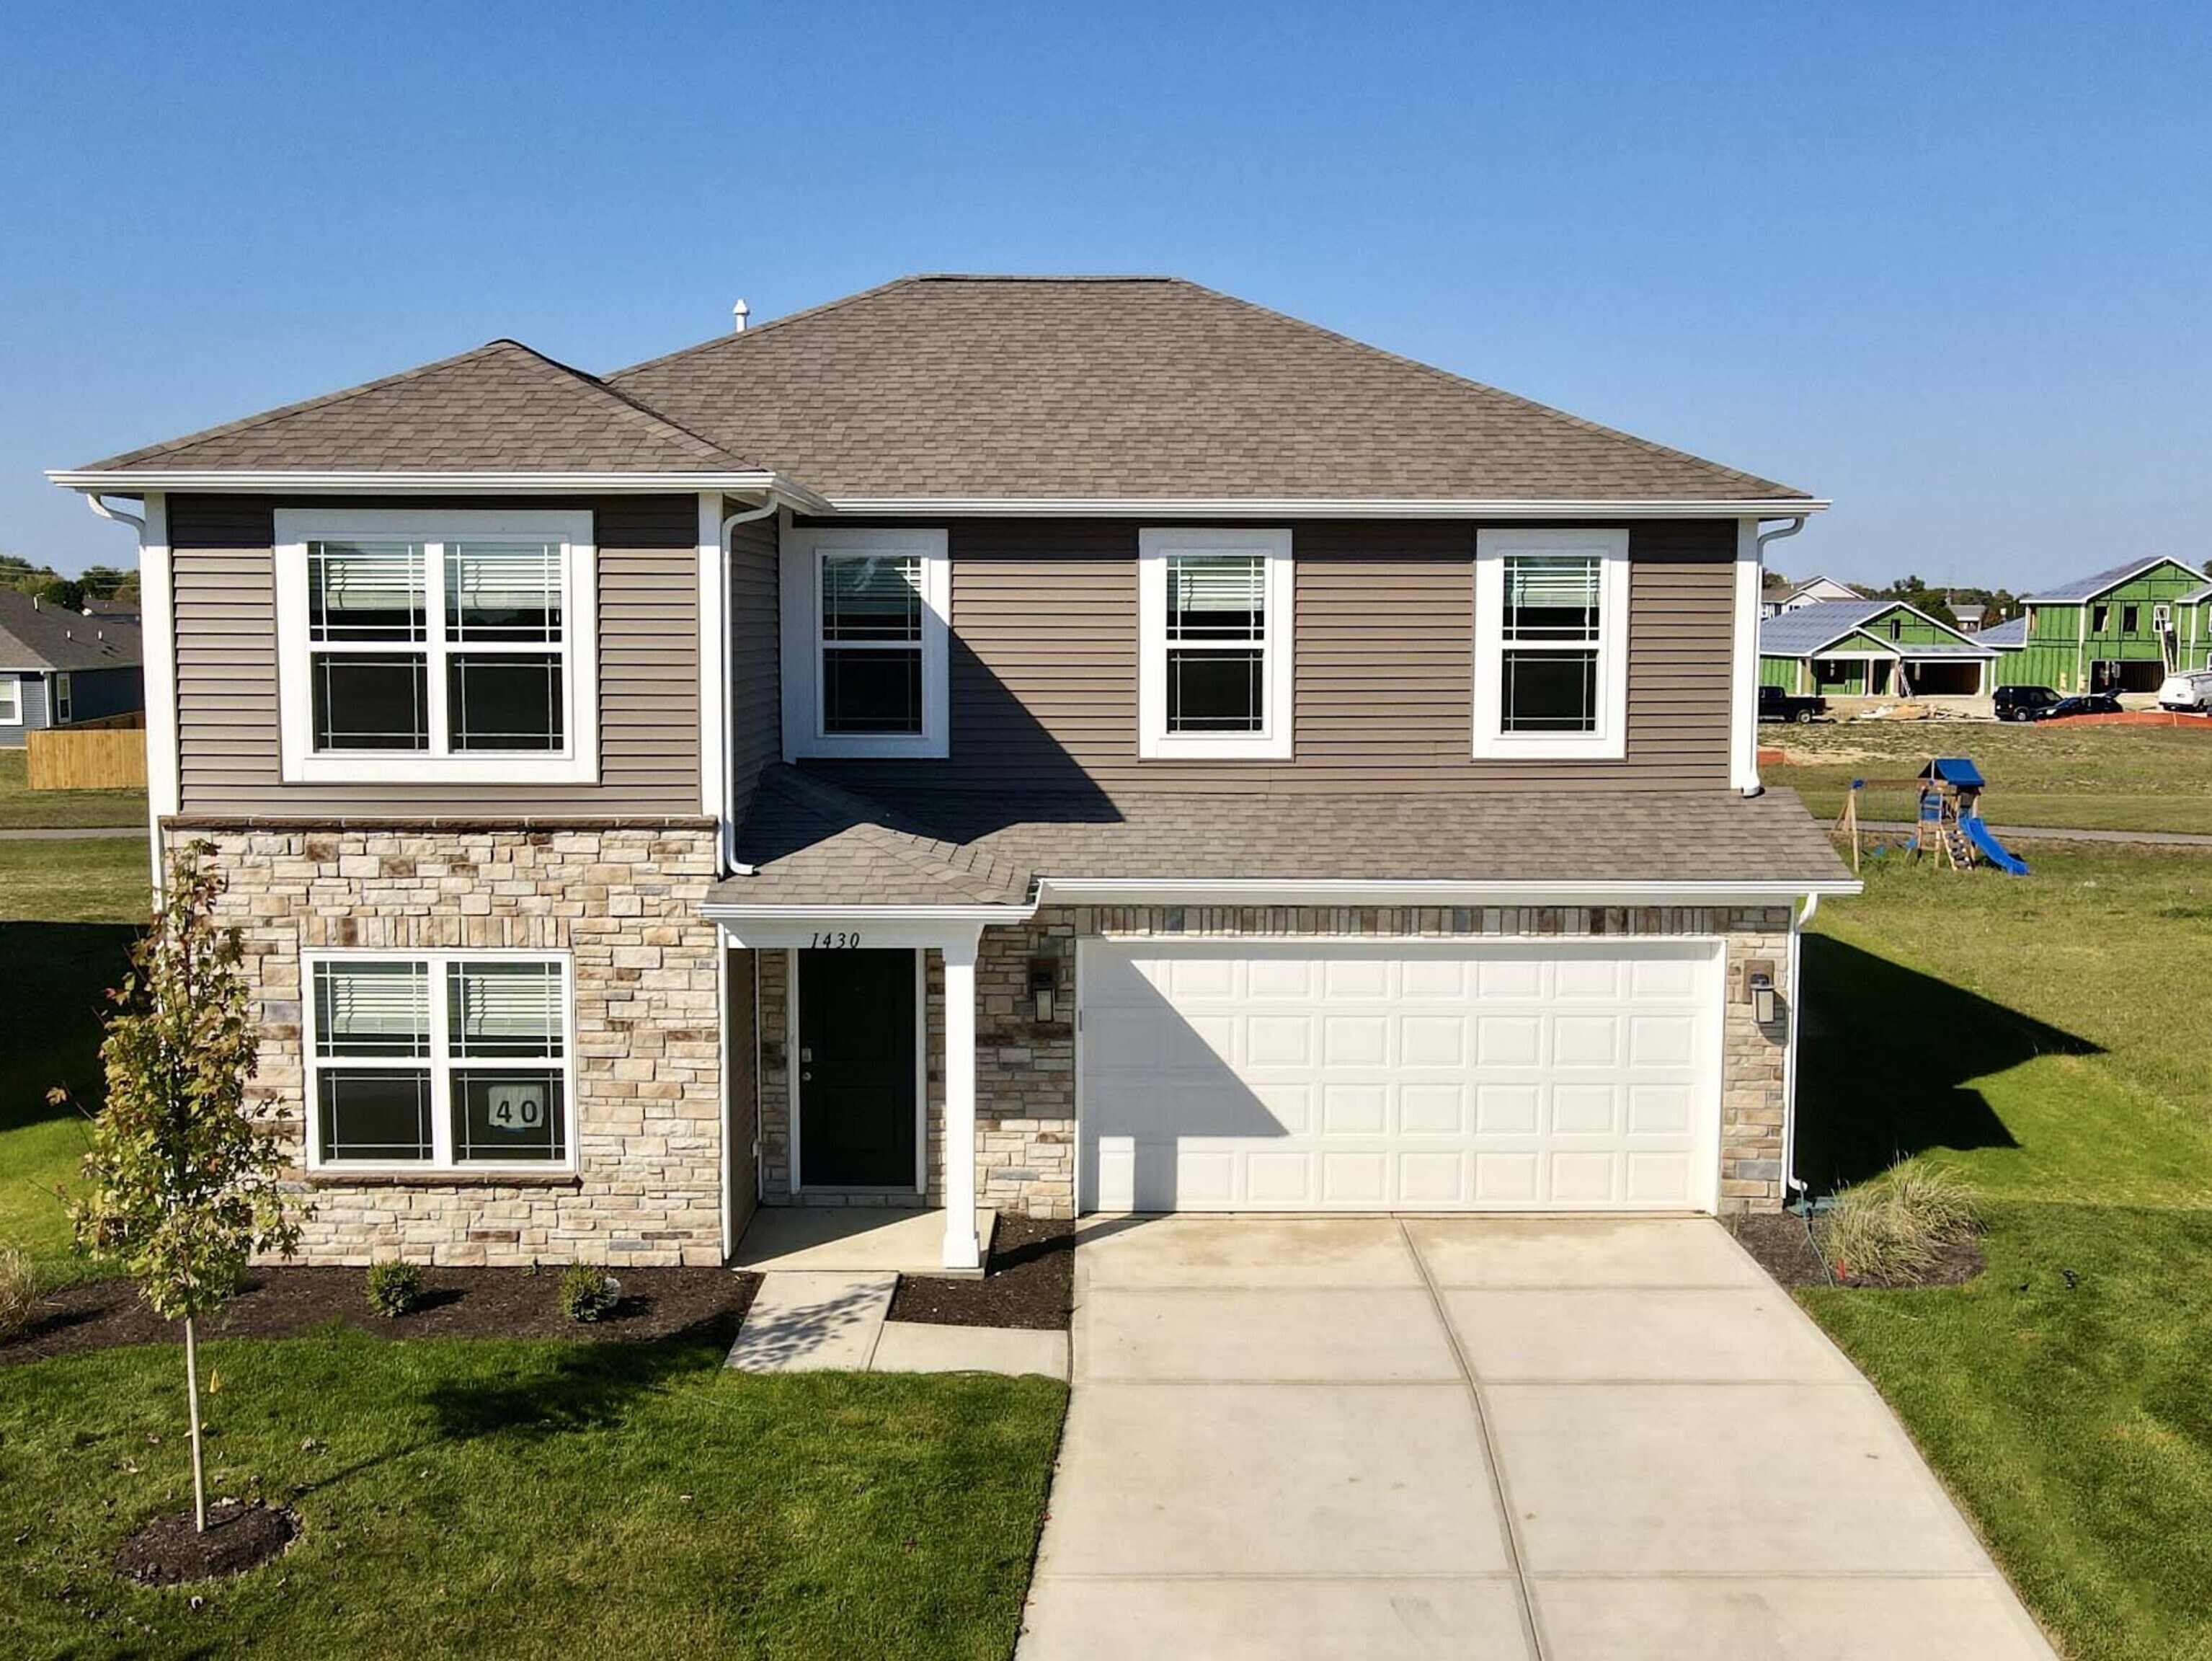 Photo of 1430 Honeysuckle Drive, Shelbyville, IN 46176